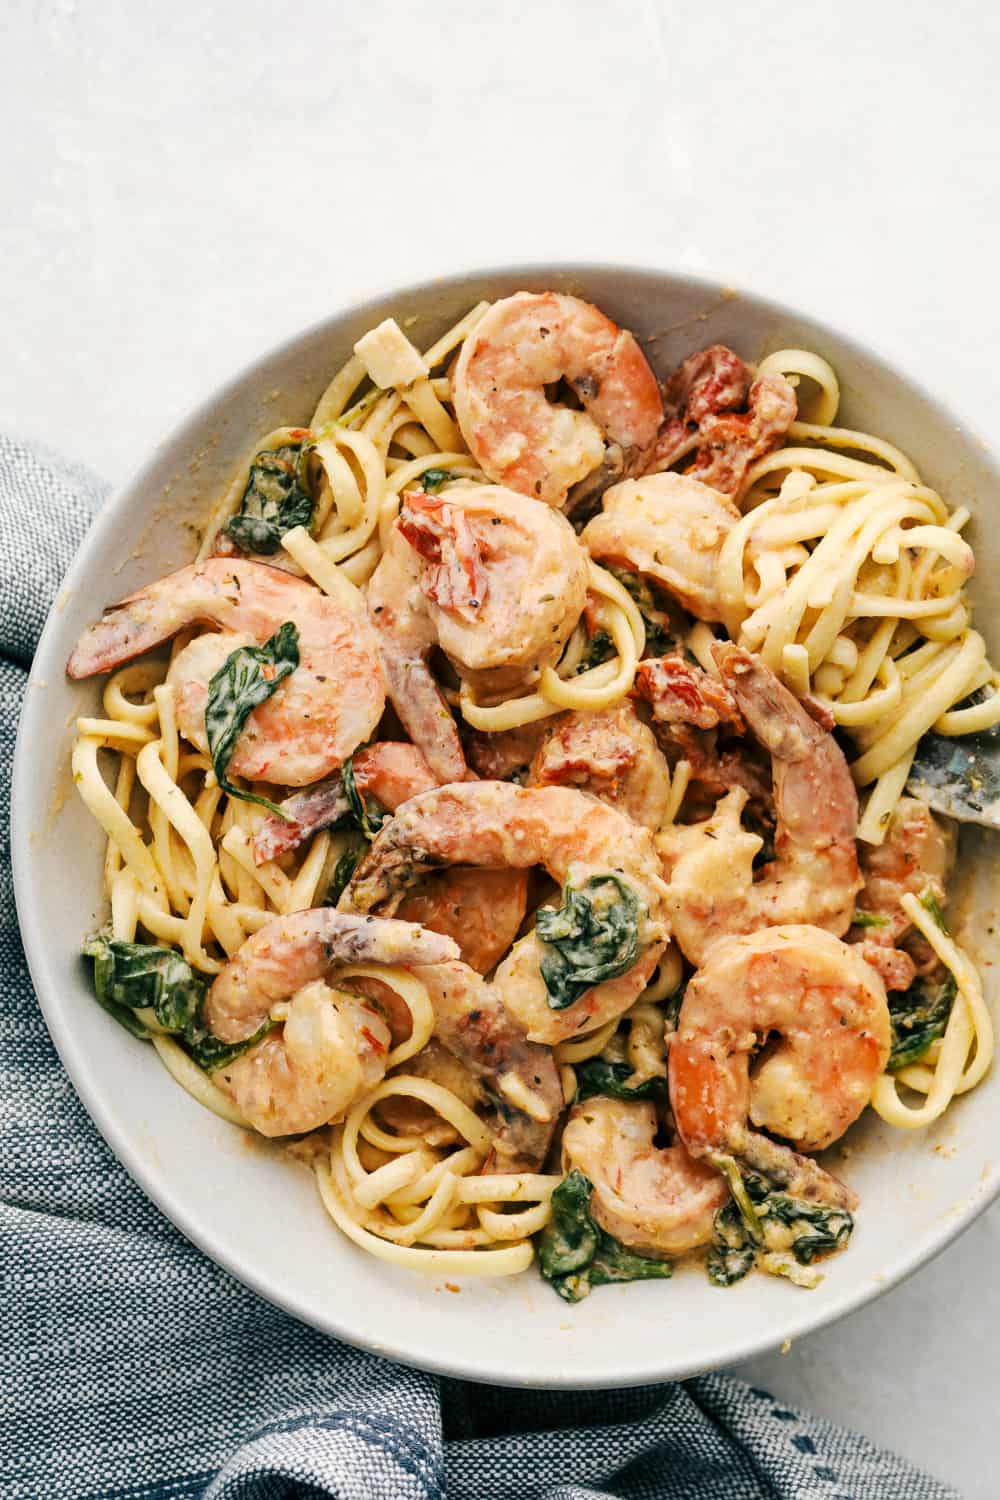 A plate of shrimp pasta, perfect as an easy dinner idea, featuring plump shrimp, linguine noodles, sun-dried tomatoes, and spinach in a creamy sauce, served on a white plate with